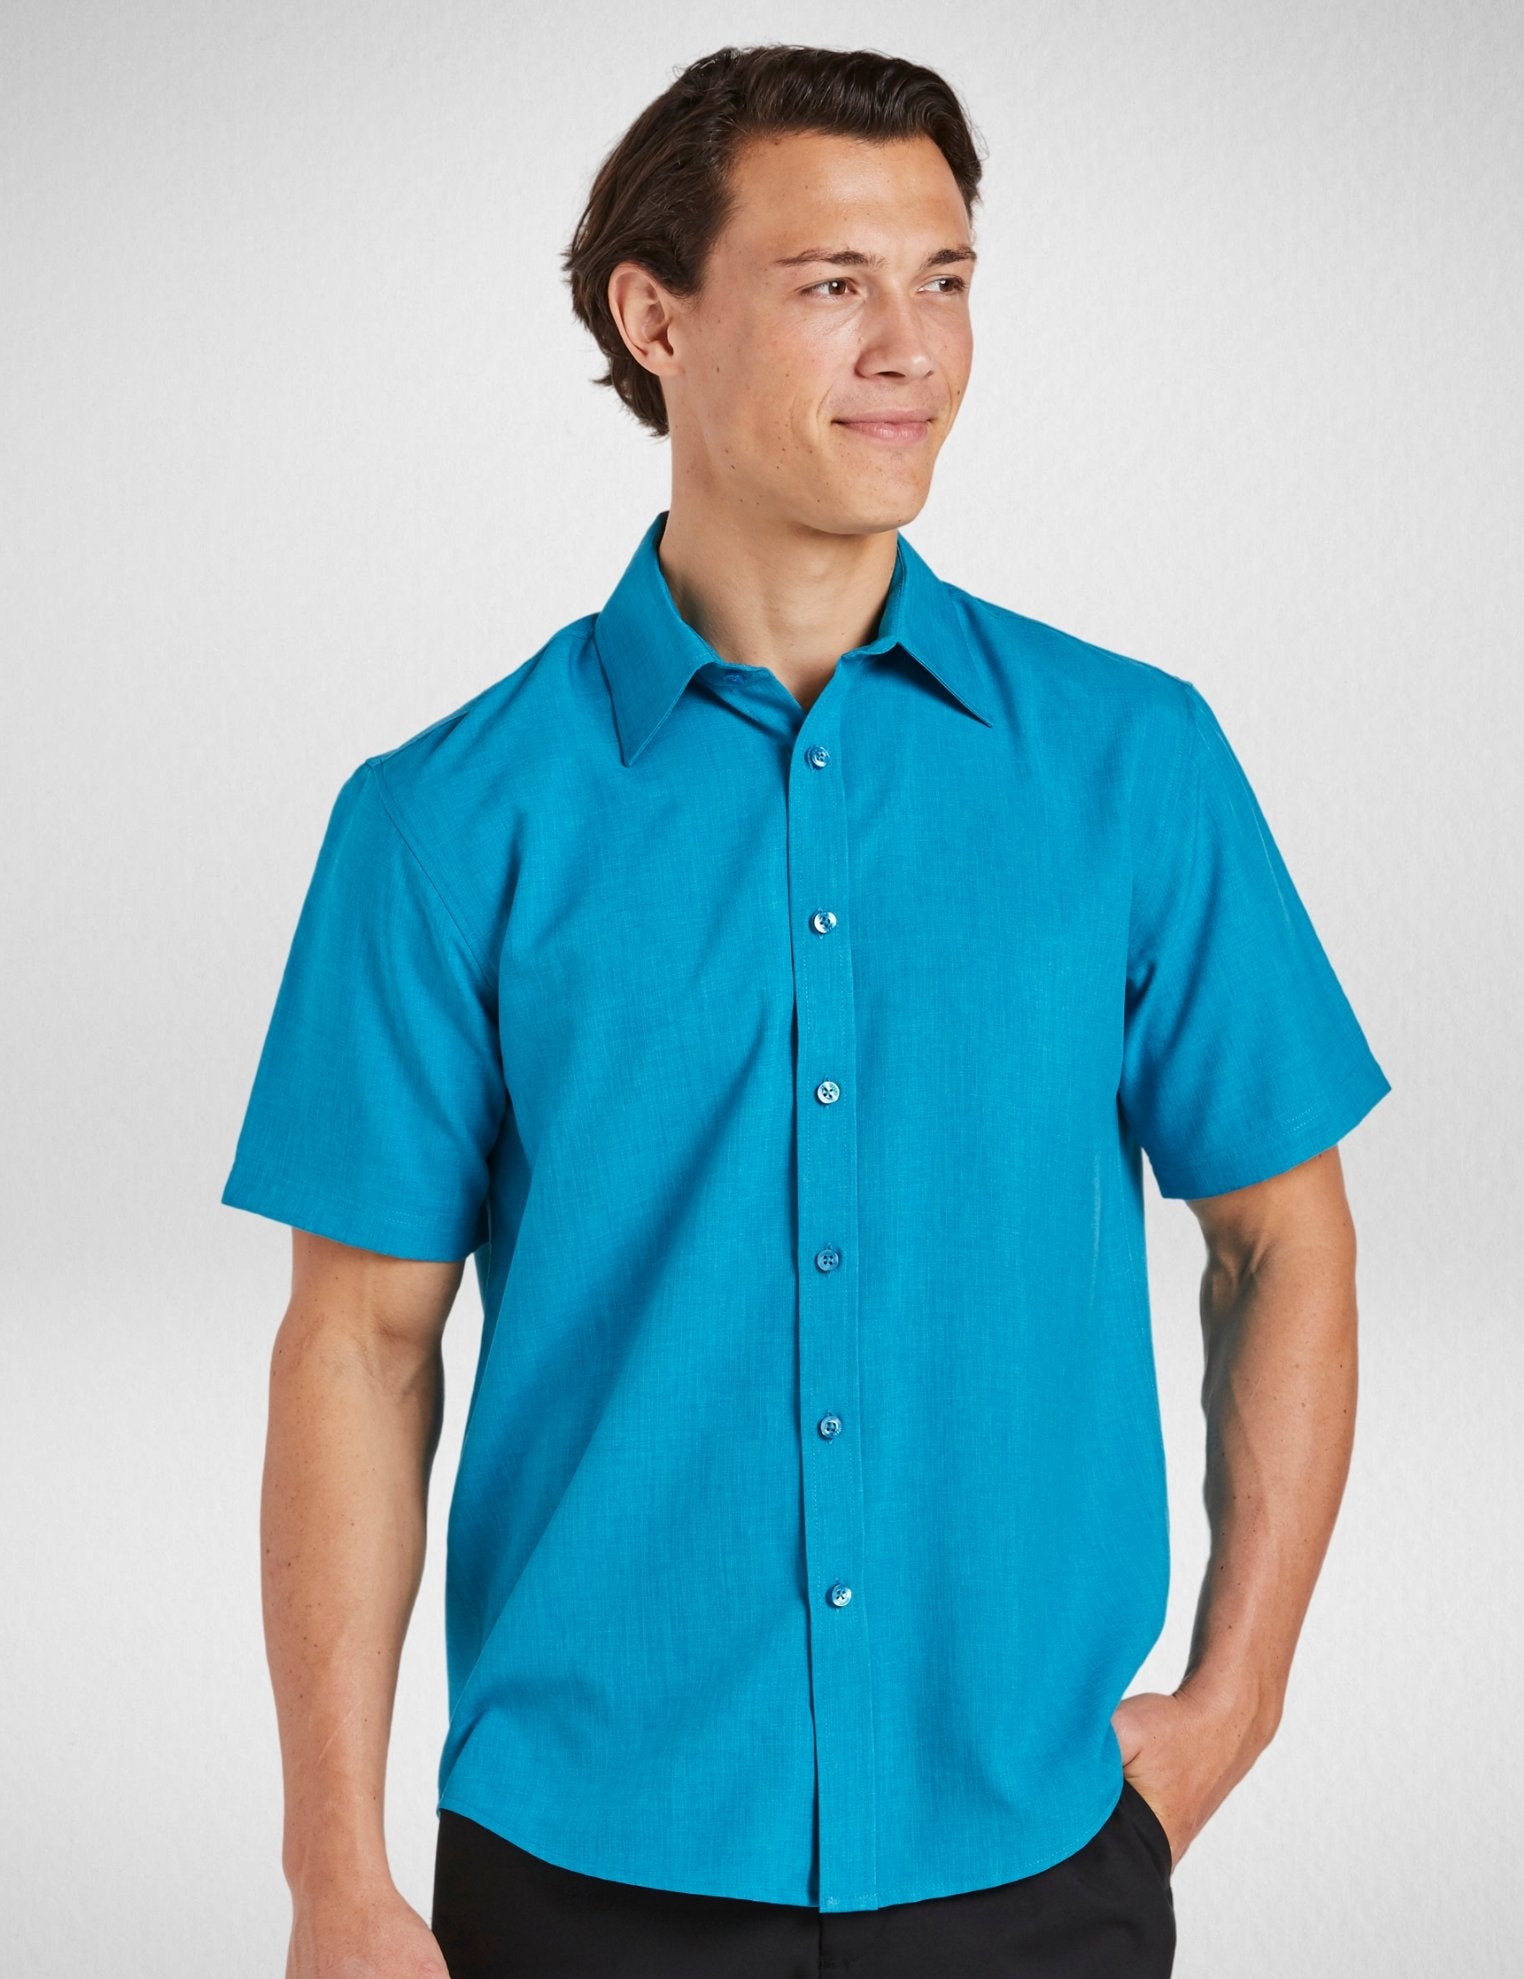 Climate Smart - Mens easy fit short sleeve - Corporate Reflection